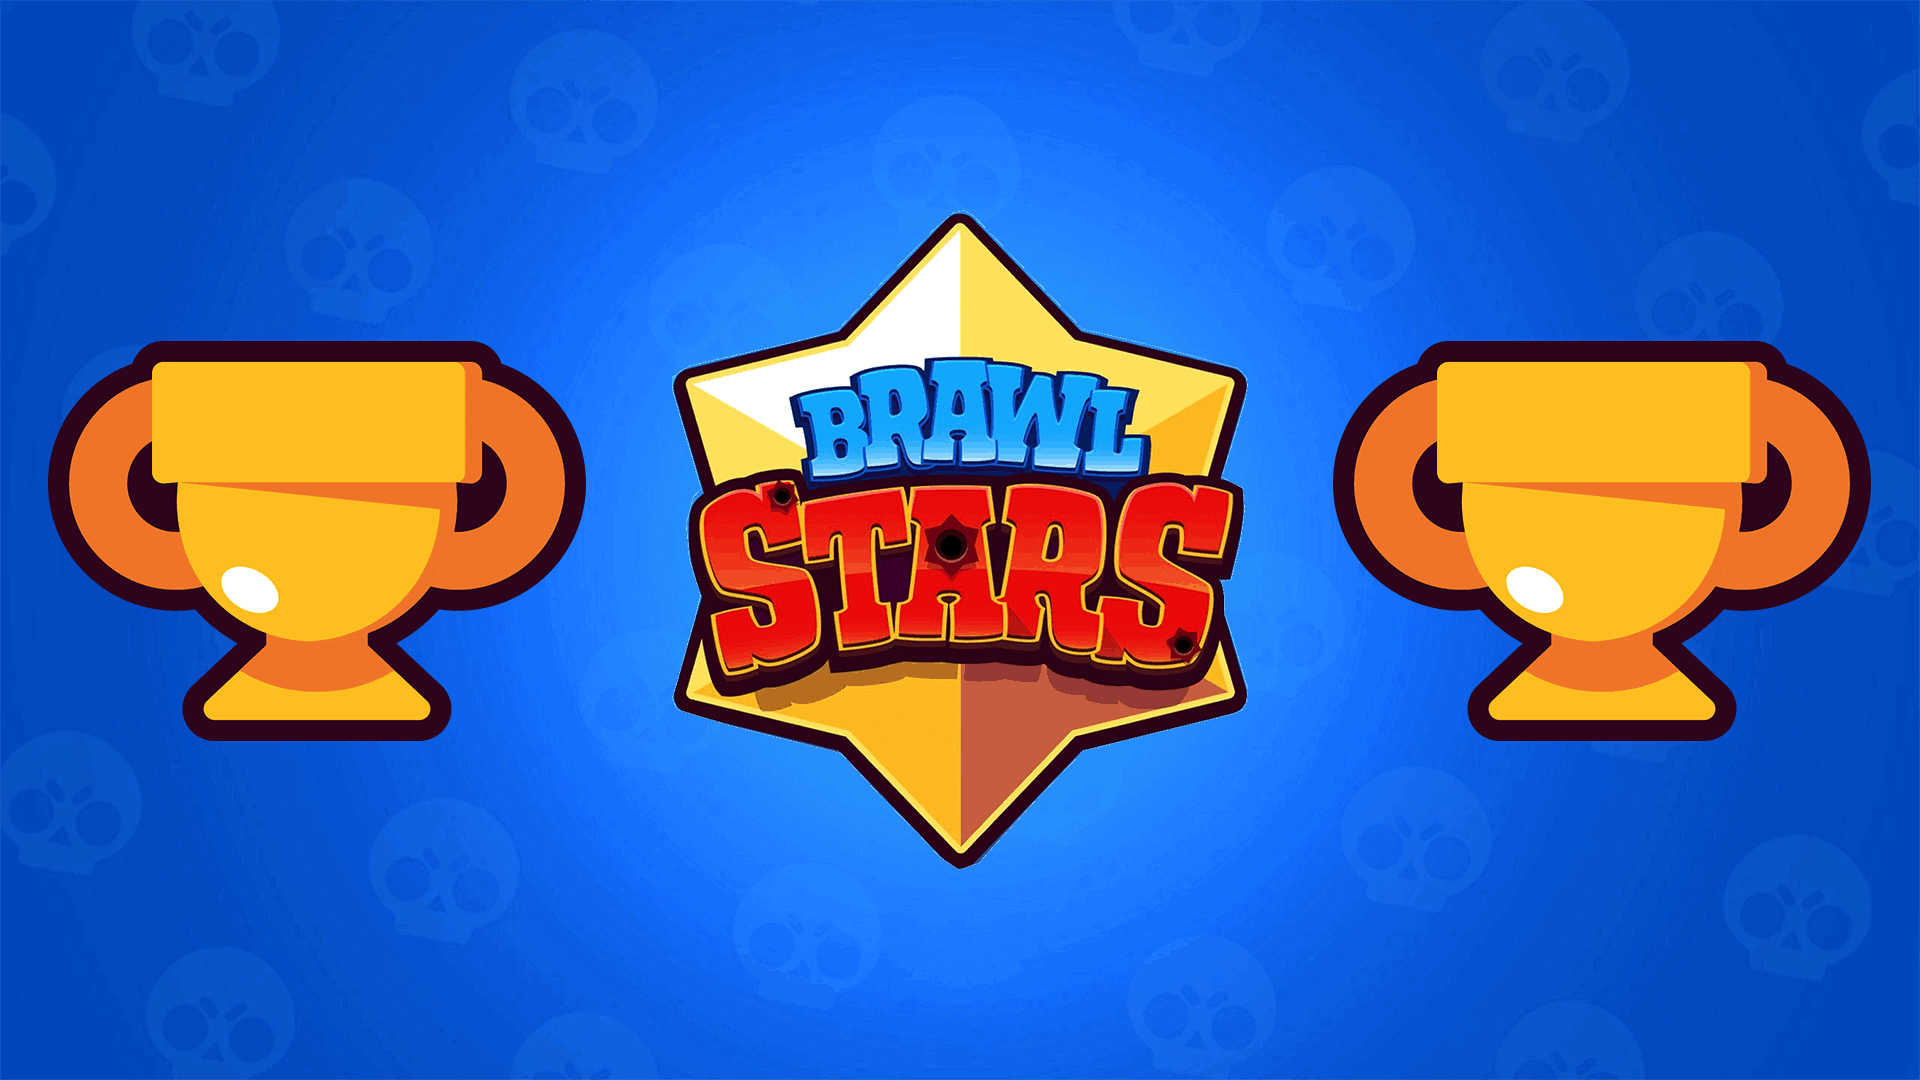 Brawl Stars how to get trophies guide